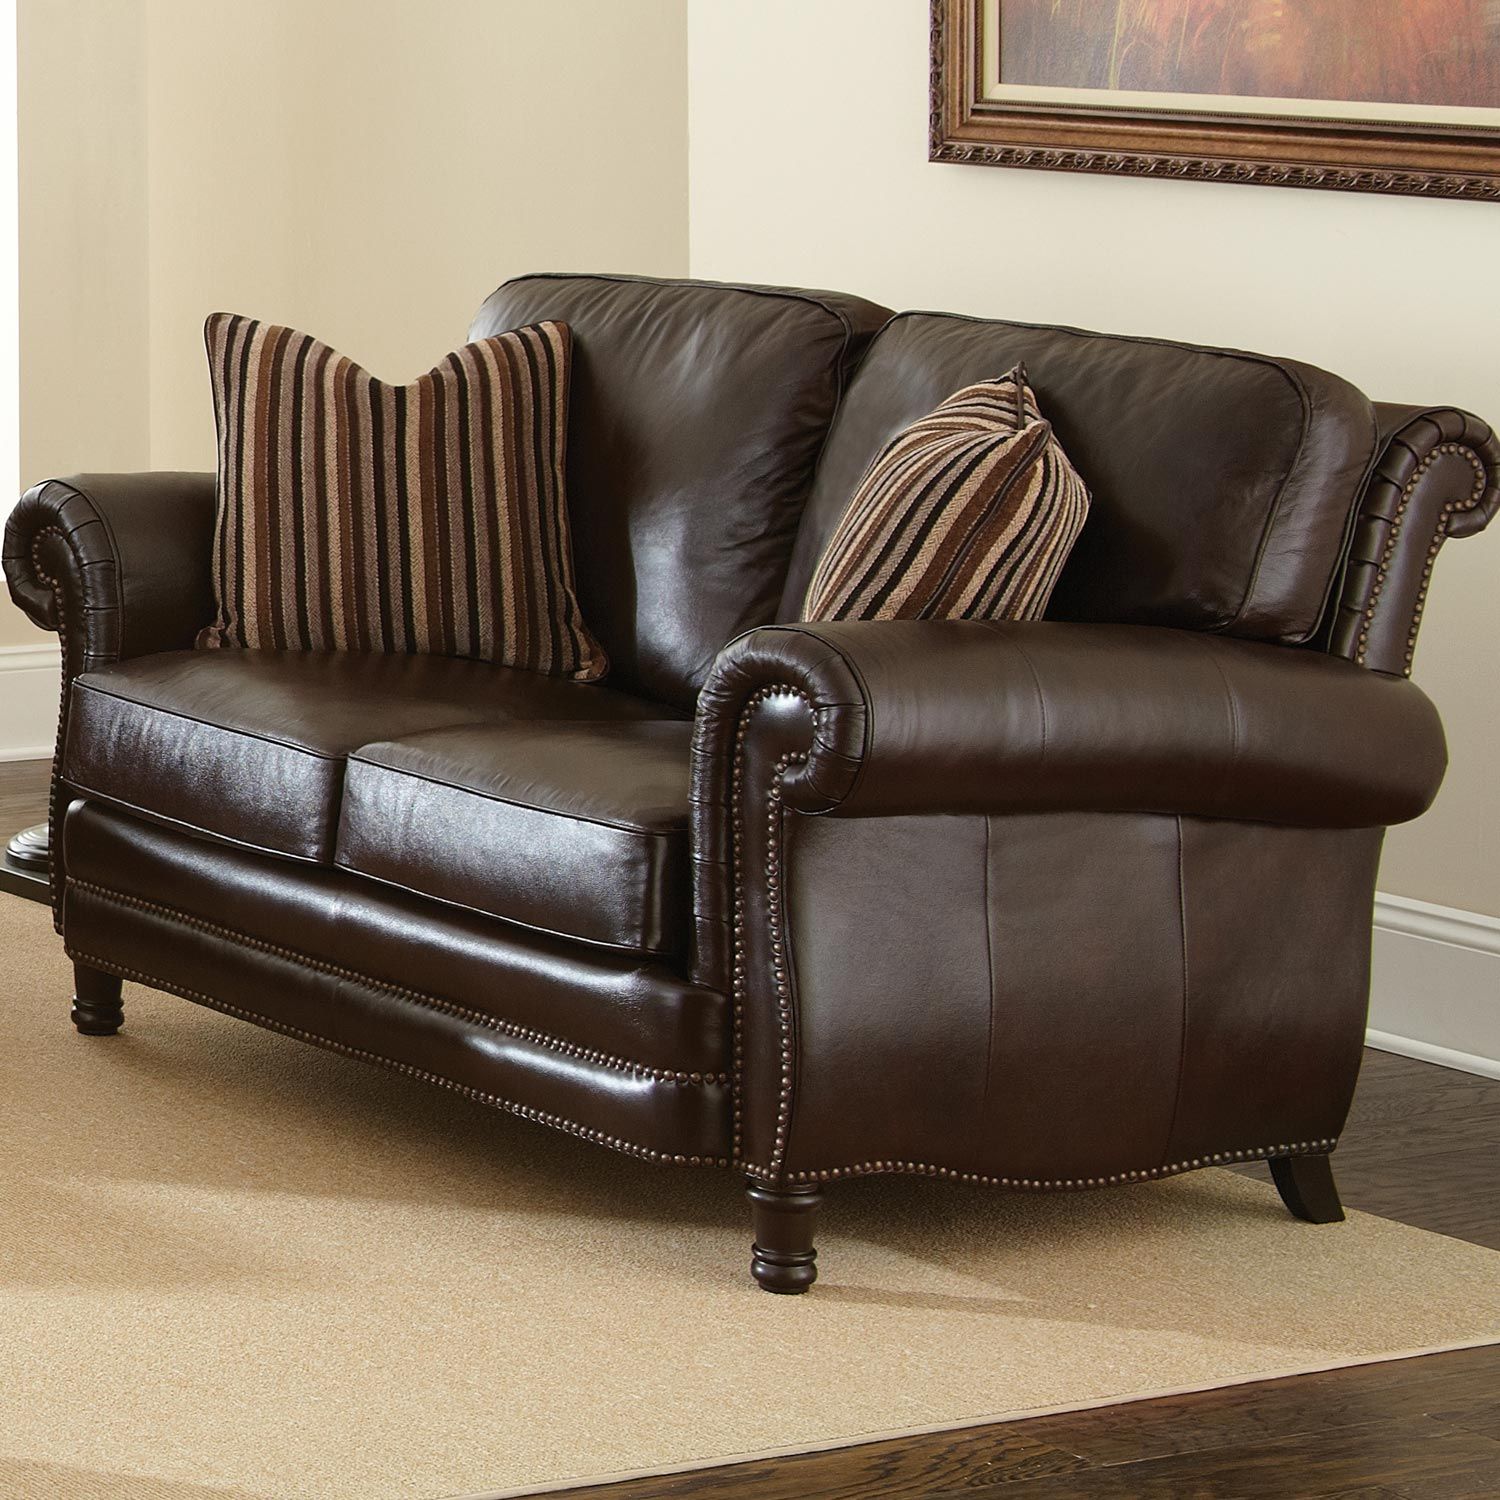 Chateau 3 Piece Leather Sofa Set – Antique Chocolate Brown | Dcg Stores Intended For Sofas In Chocolate Brown (Gallery 1 of 20)